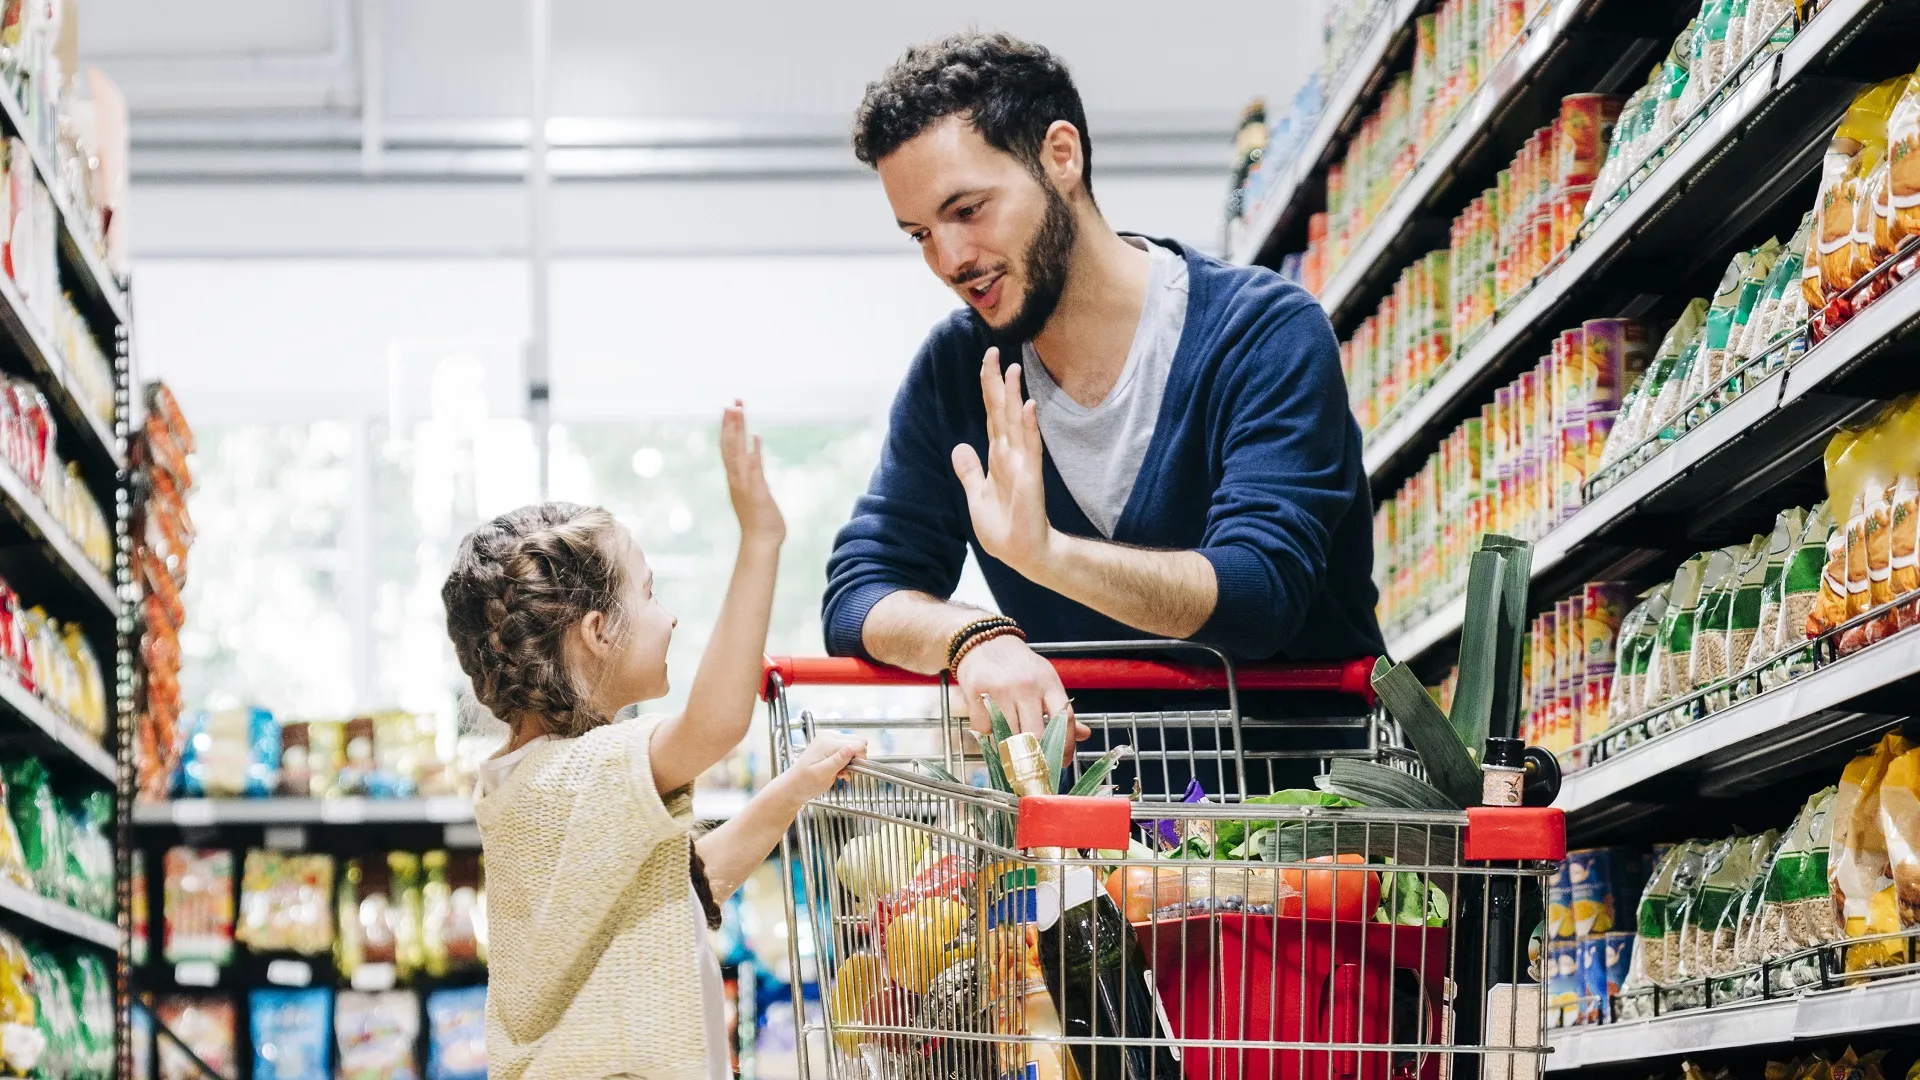 Father giving high five to daughter in supermarket stock photo